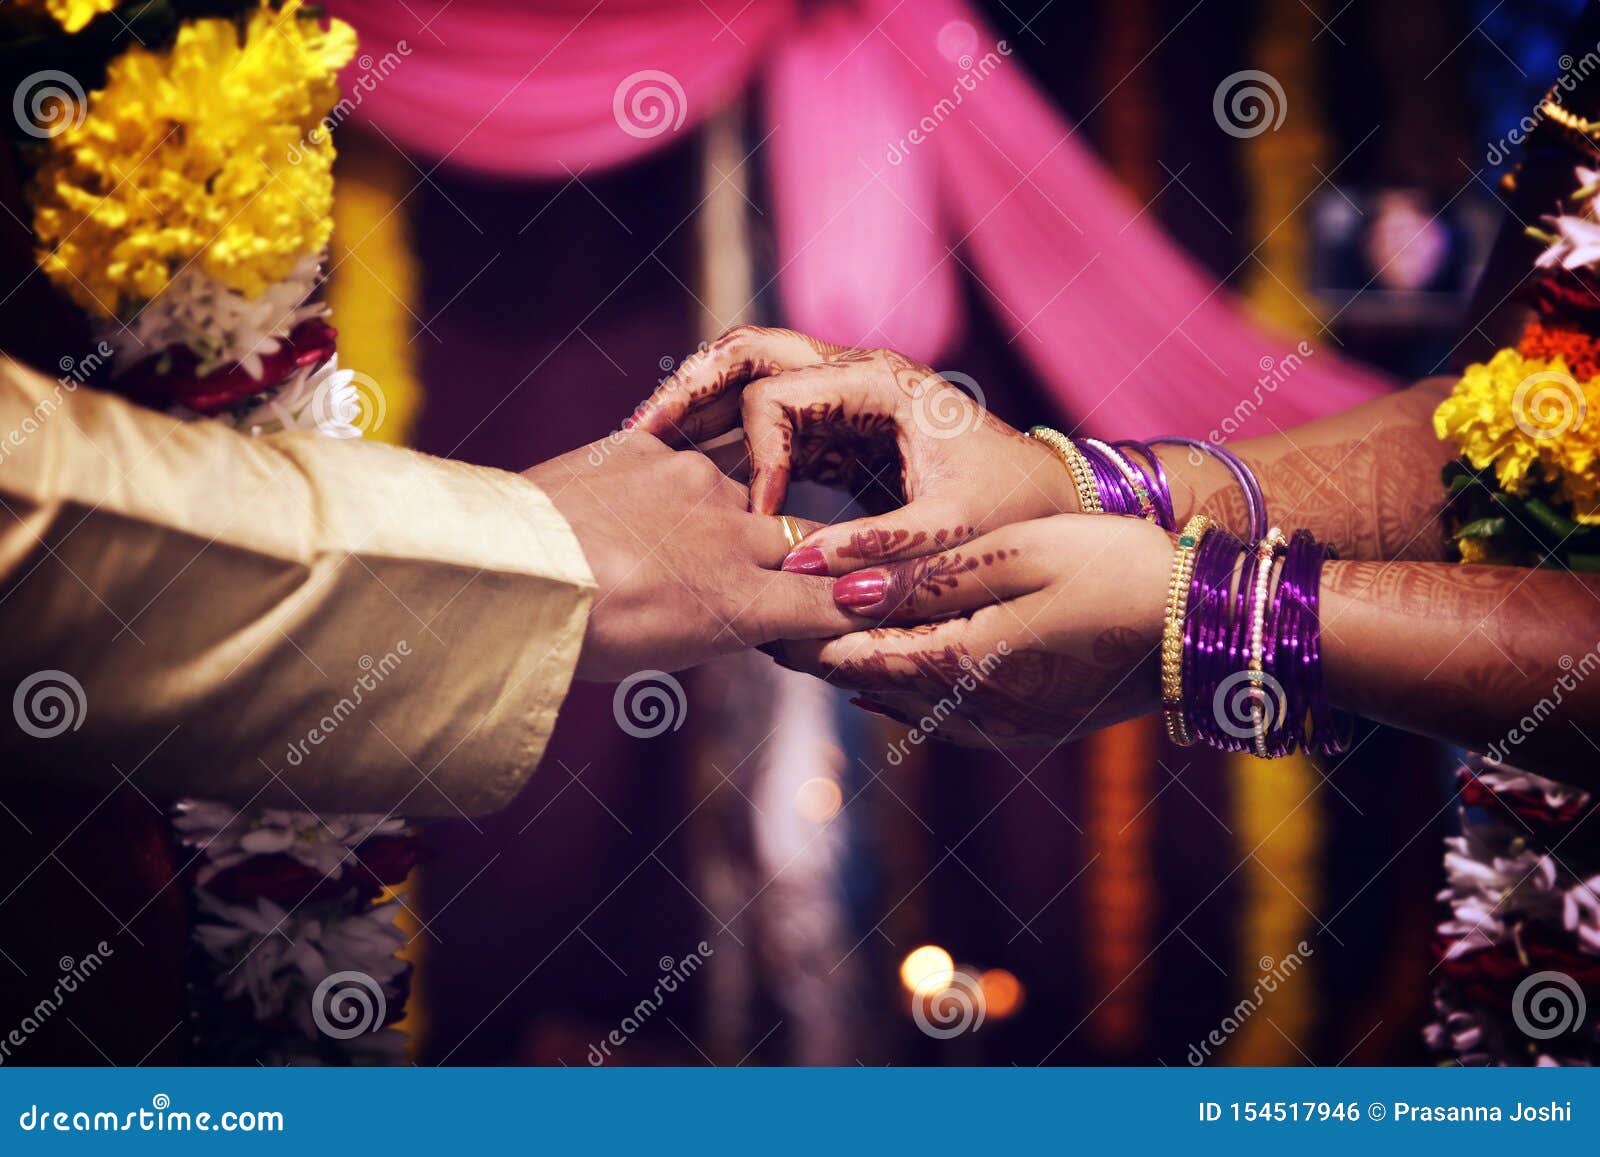 Best Couples ring ceremony Illustration download in PNG & Vector format